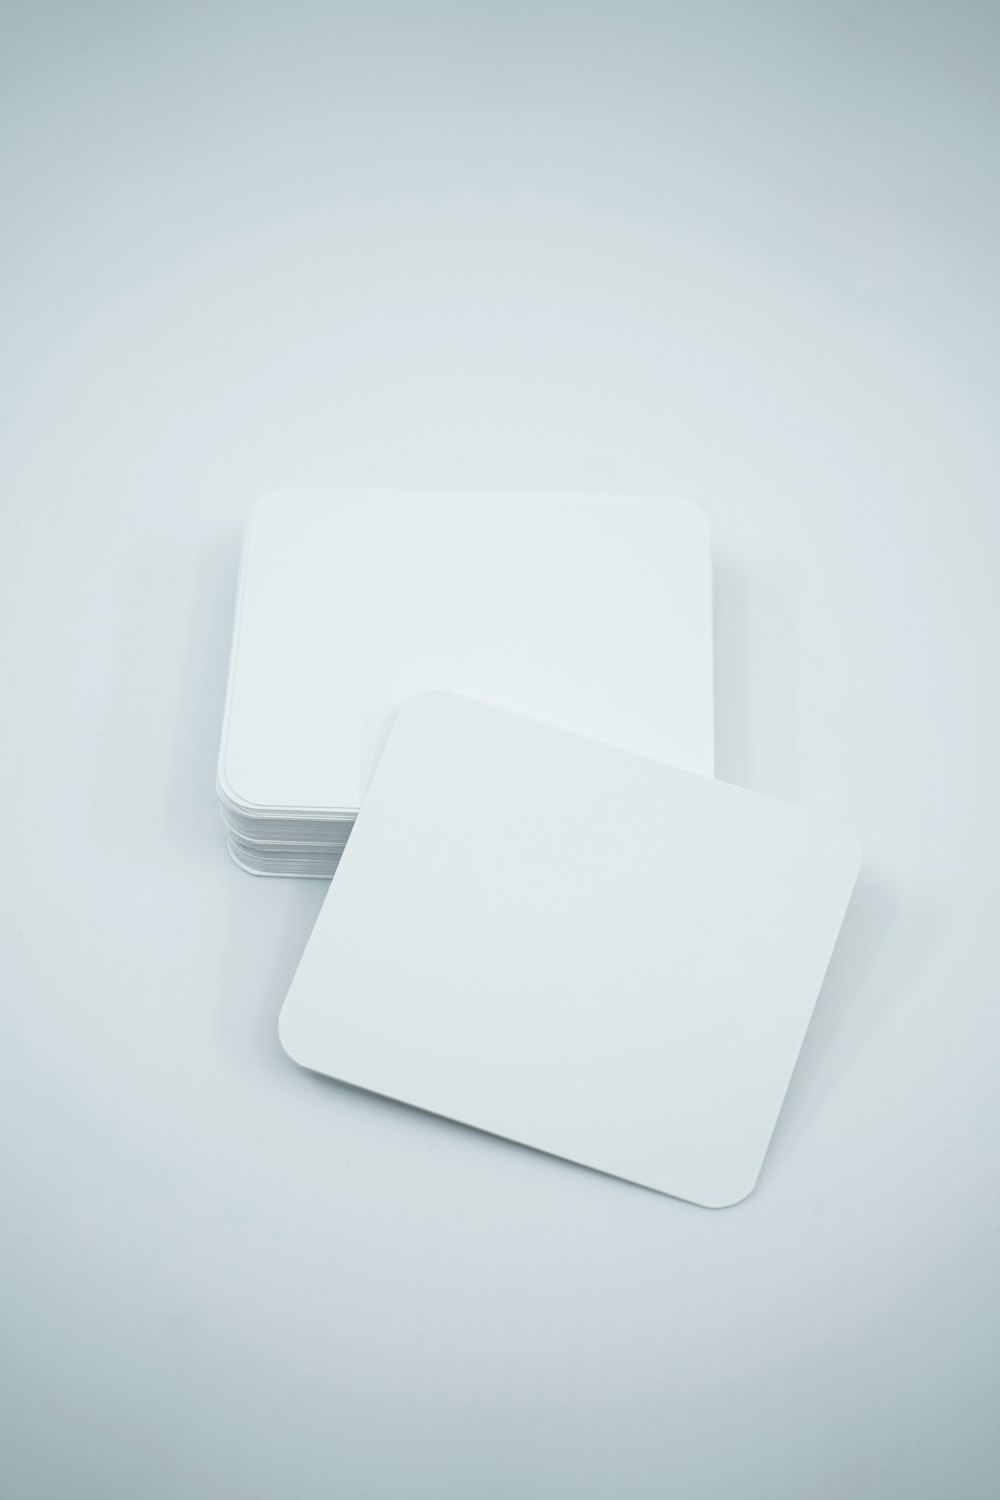 White Card Pictures  Download Free Images on Unsplash